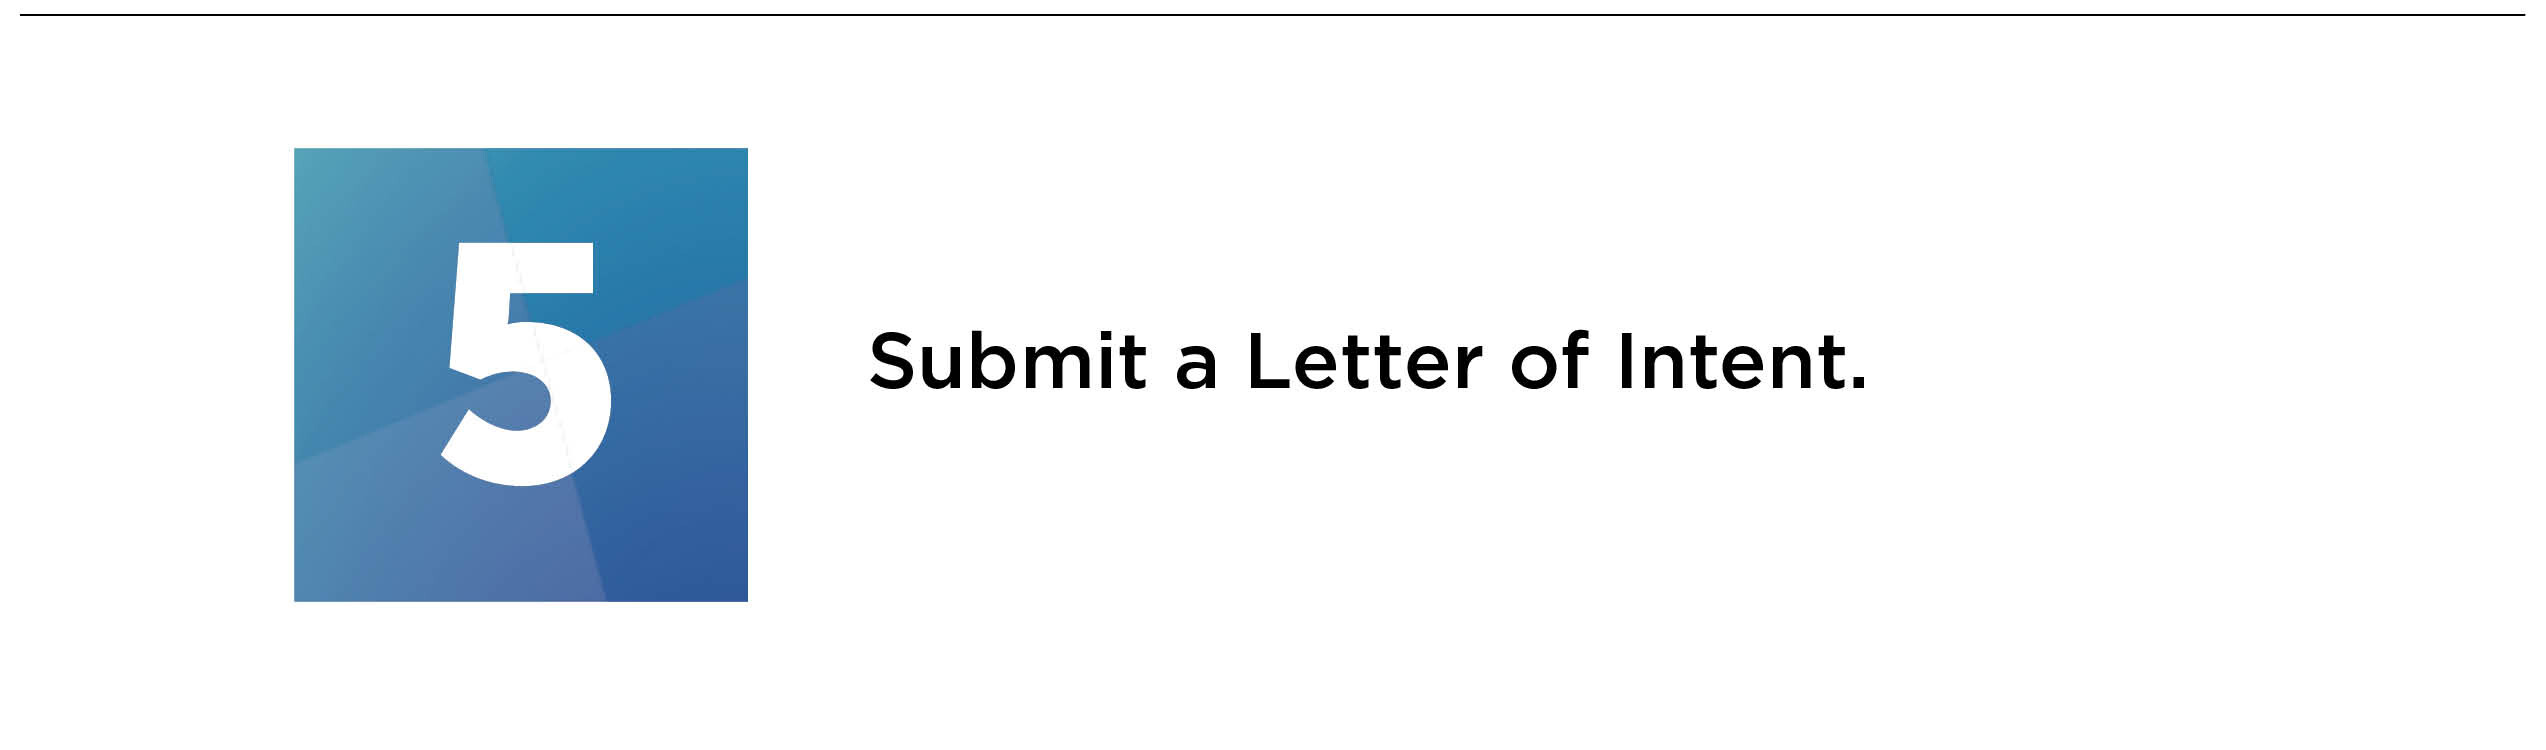 submit a letter of intent